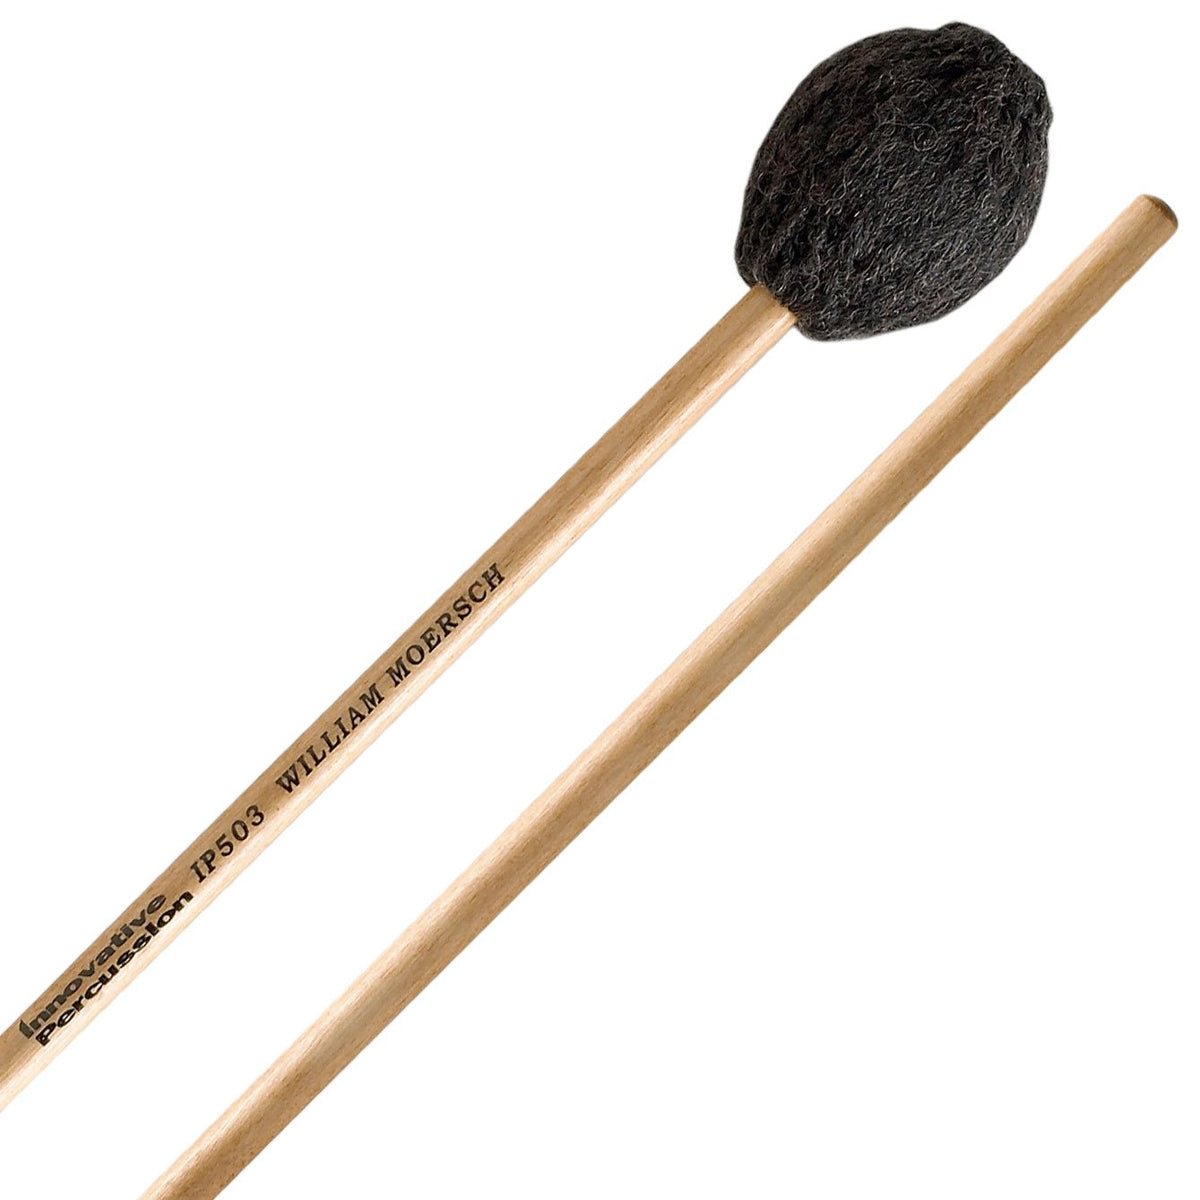 Innovative Percussion - William Moersch Series Concert Marimba Mallets-Percussion-Innovative Percussion-IP503: Medium Hard (Synthetic Core)-Music Elements